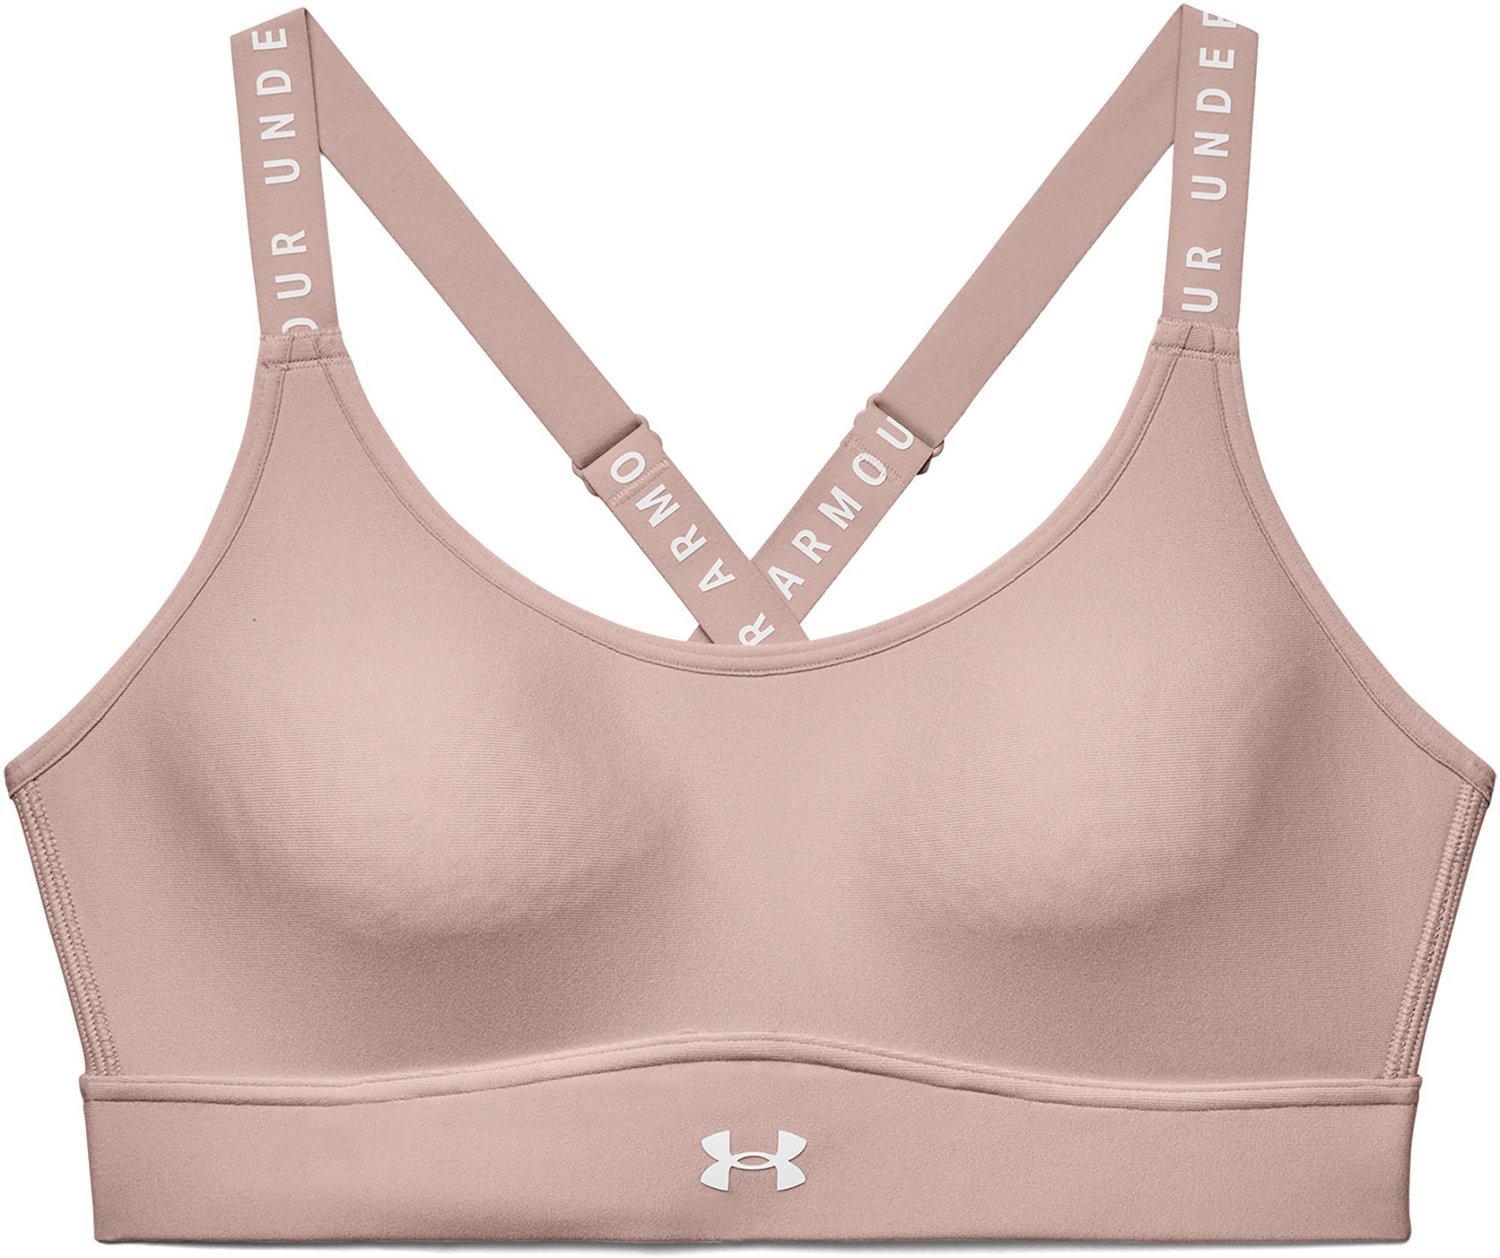 Top Sports Women's Under armour Infinity Mid Covered - 1363353 Avy 433